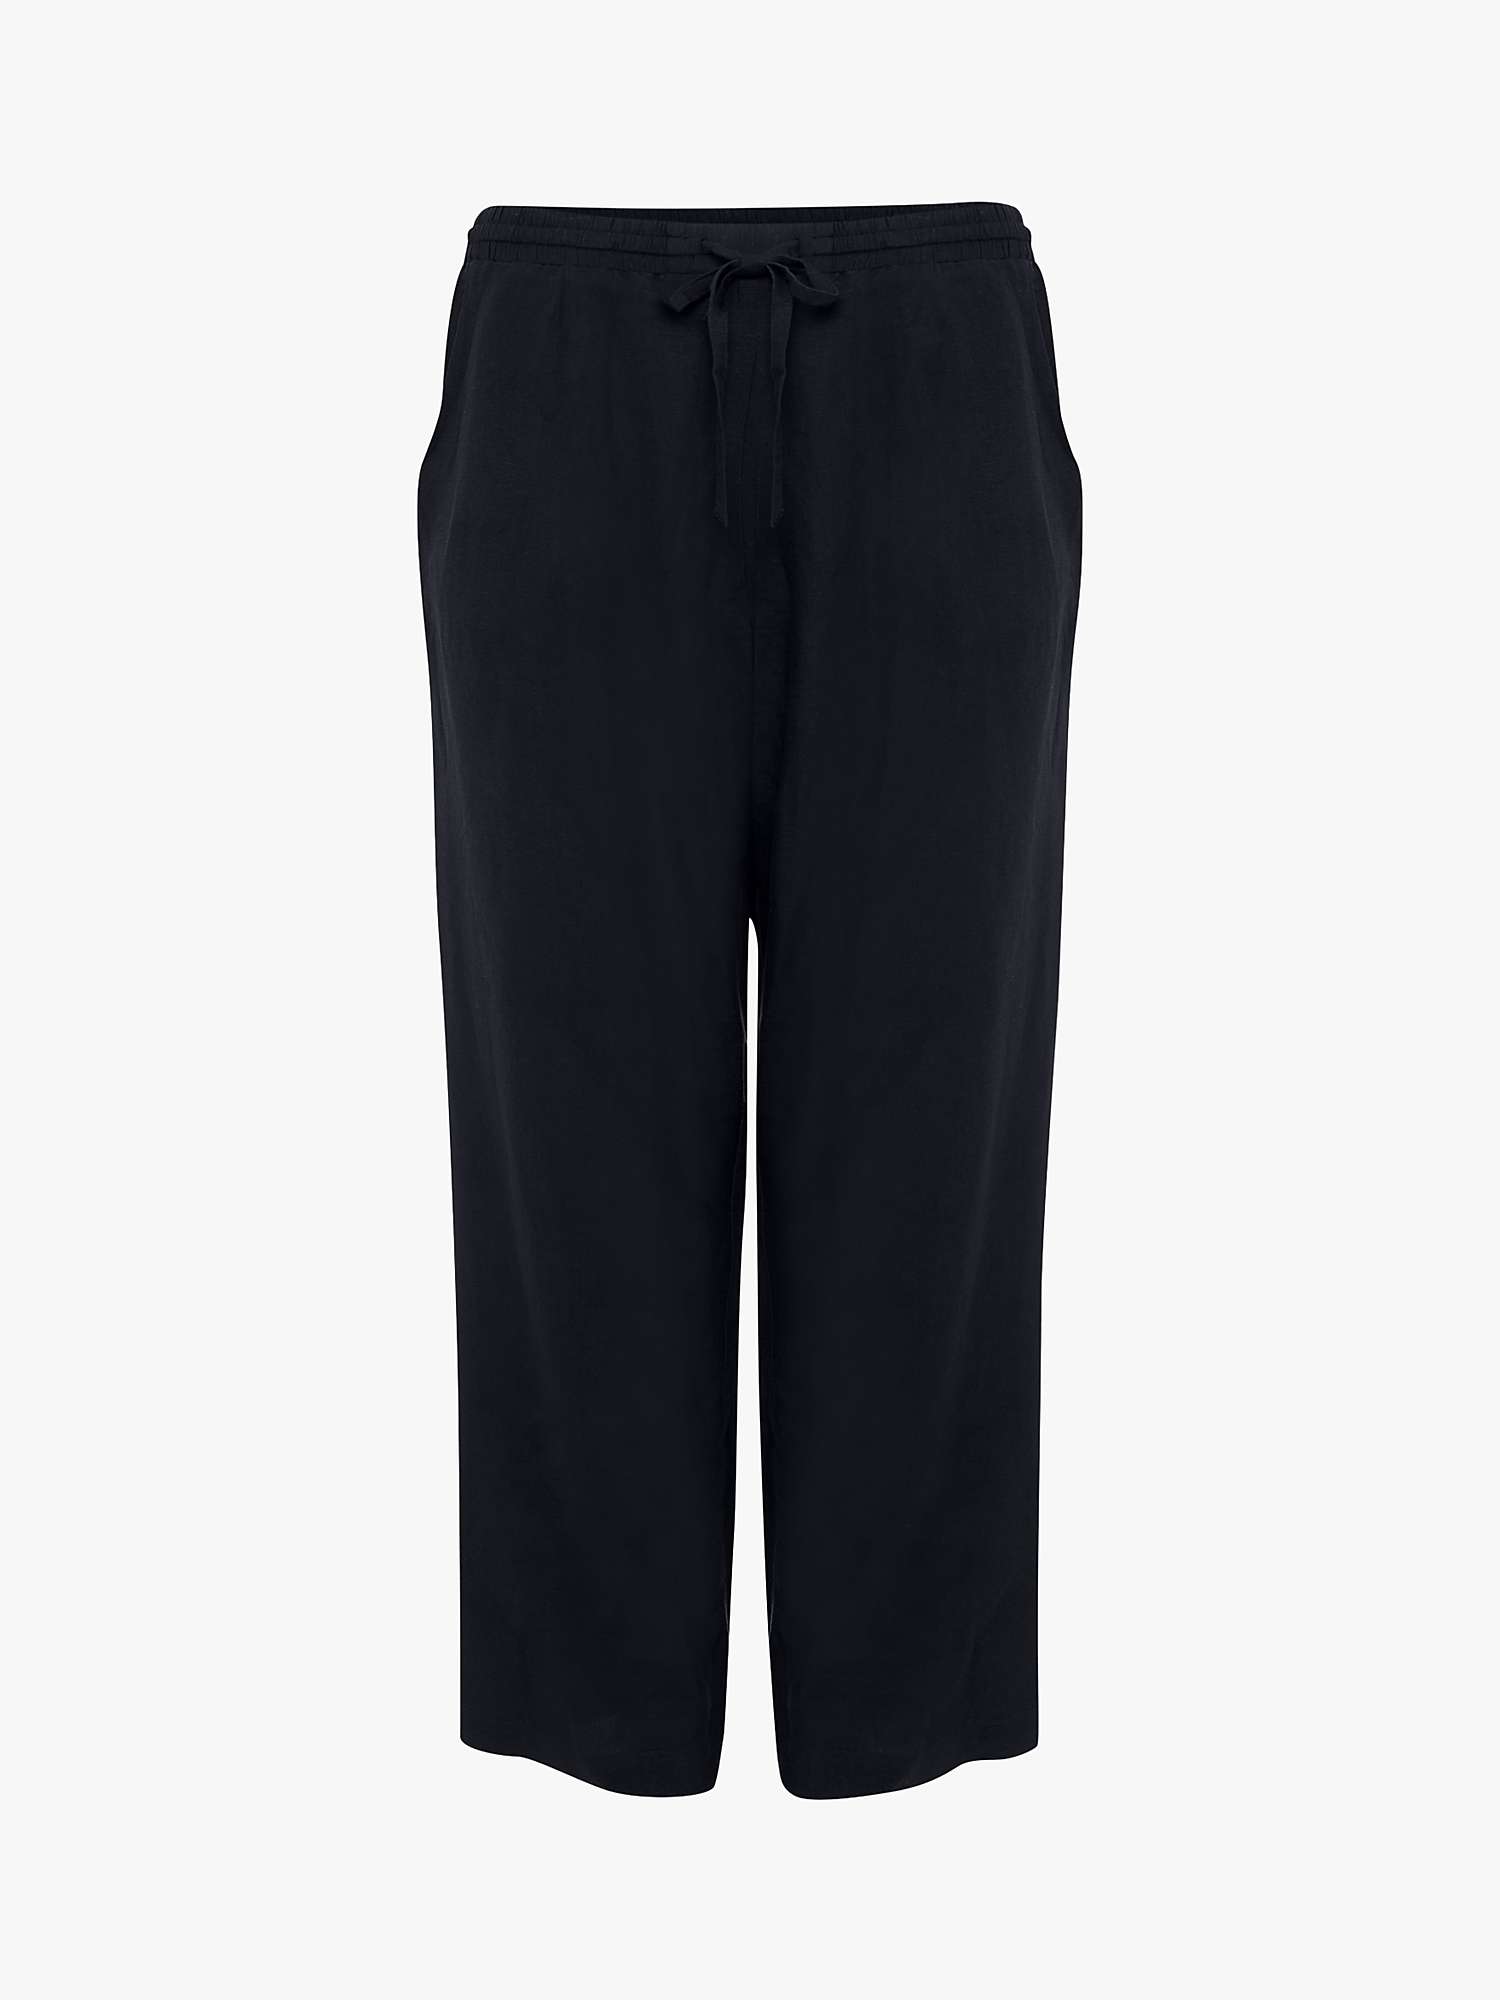 Buy Studio 8 Bethany Trousers, Navy Online at johnlewis.com